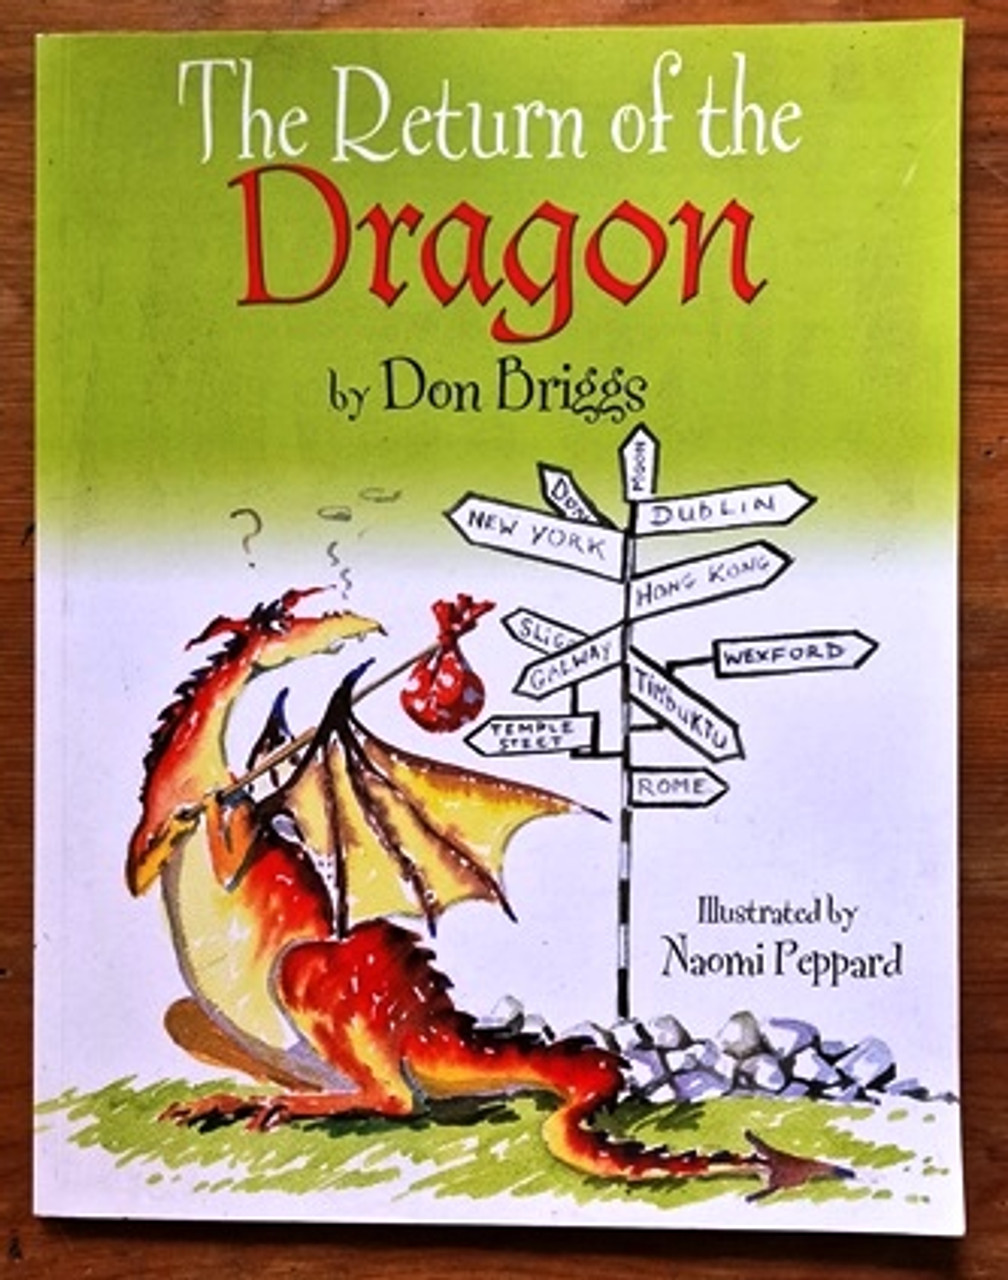 Don Briggs / The Return of the Dragon (Signed by the Author) (Children's Picture Book).